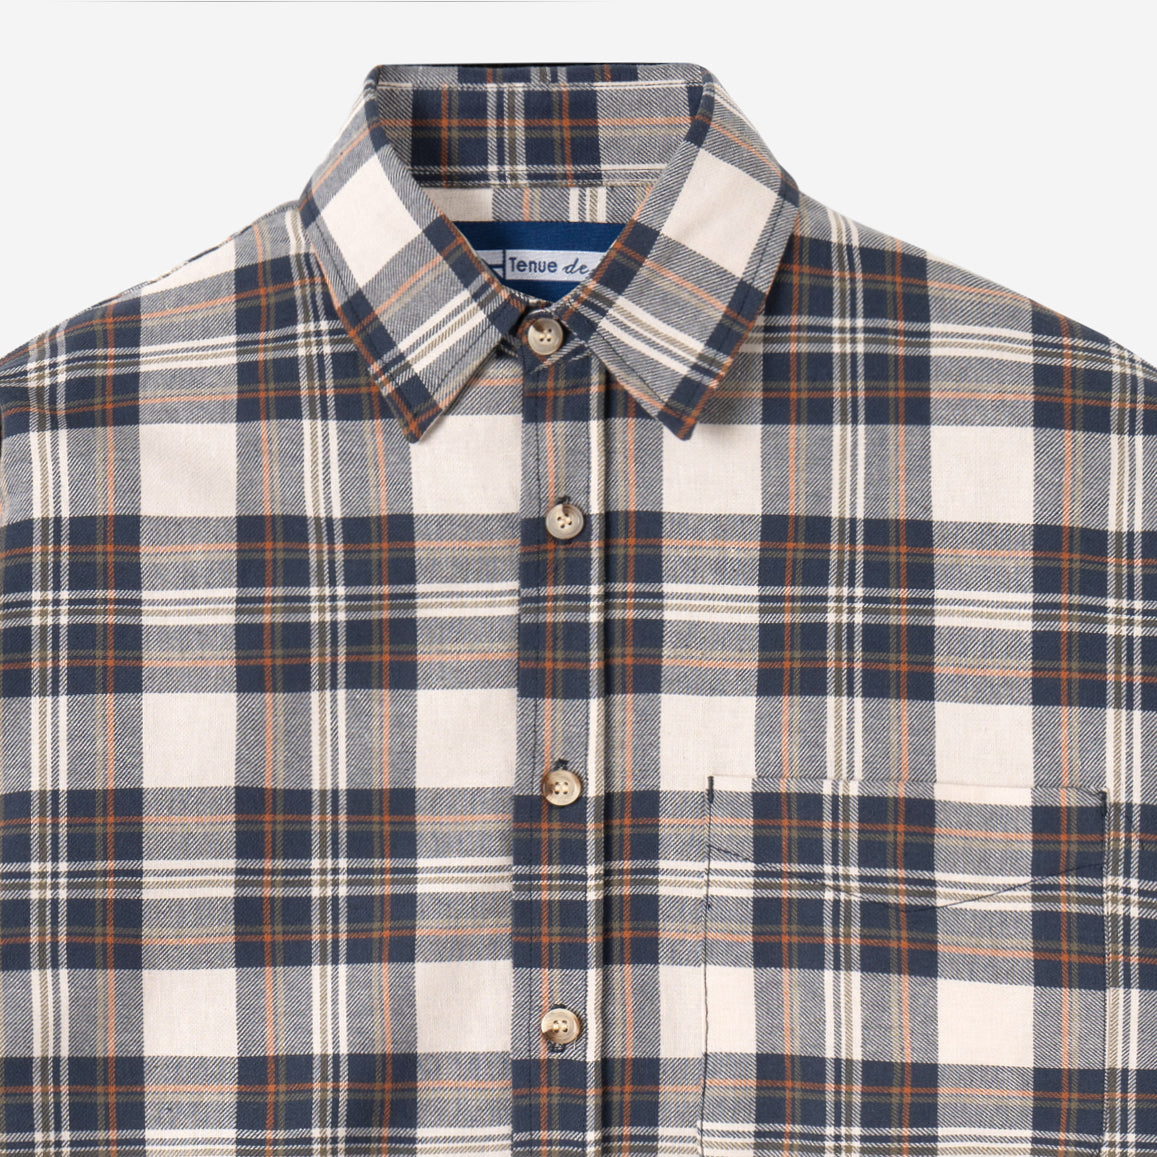 Day to Day Flannel - Sand Navy